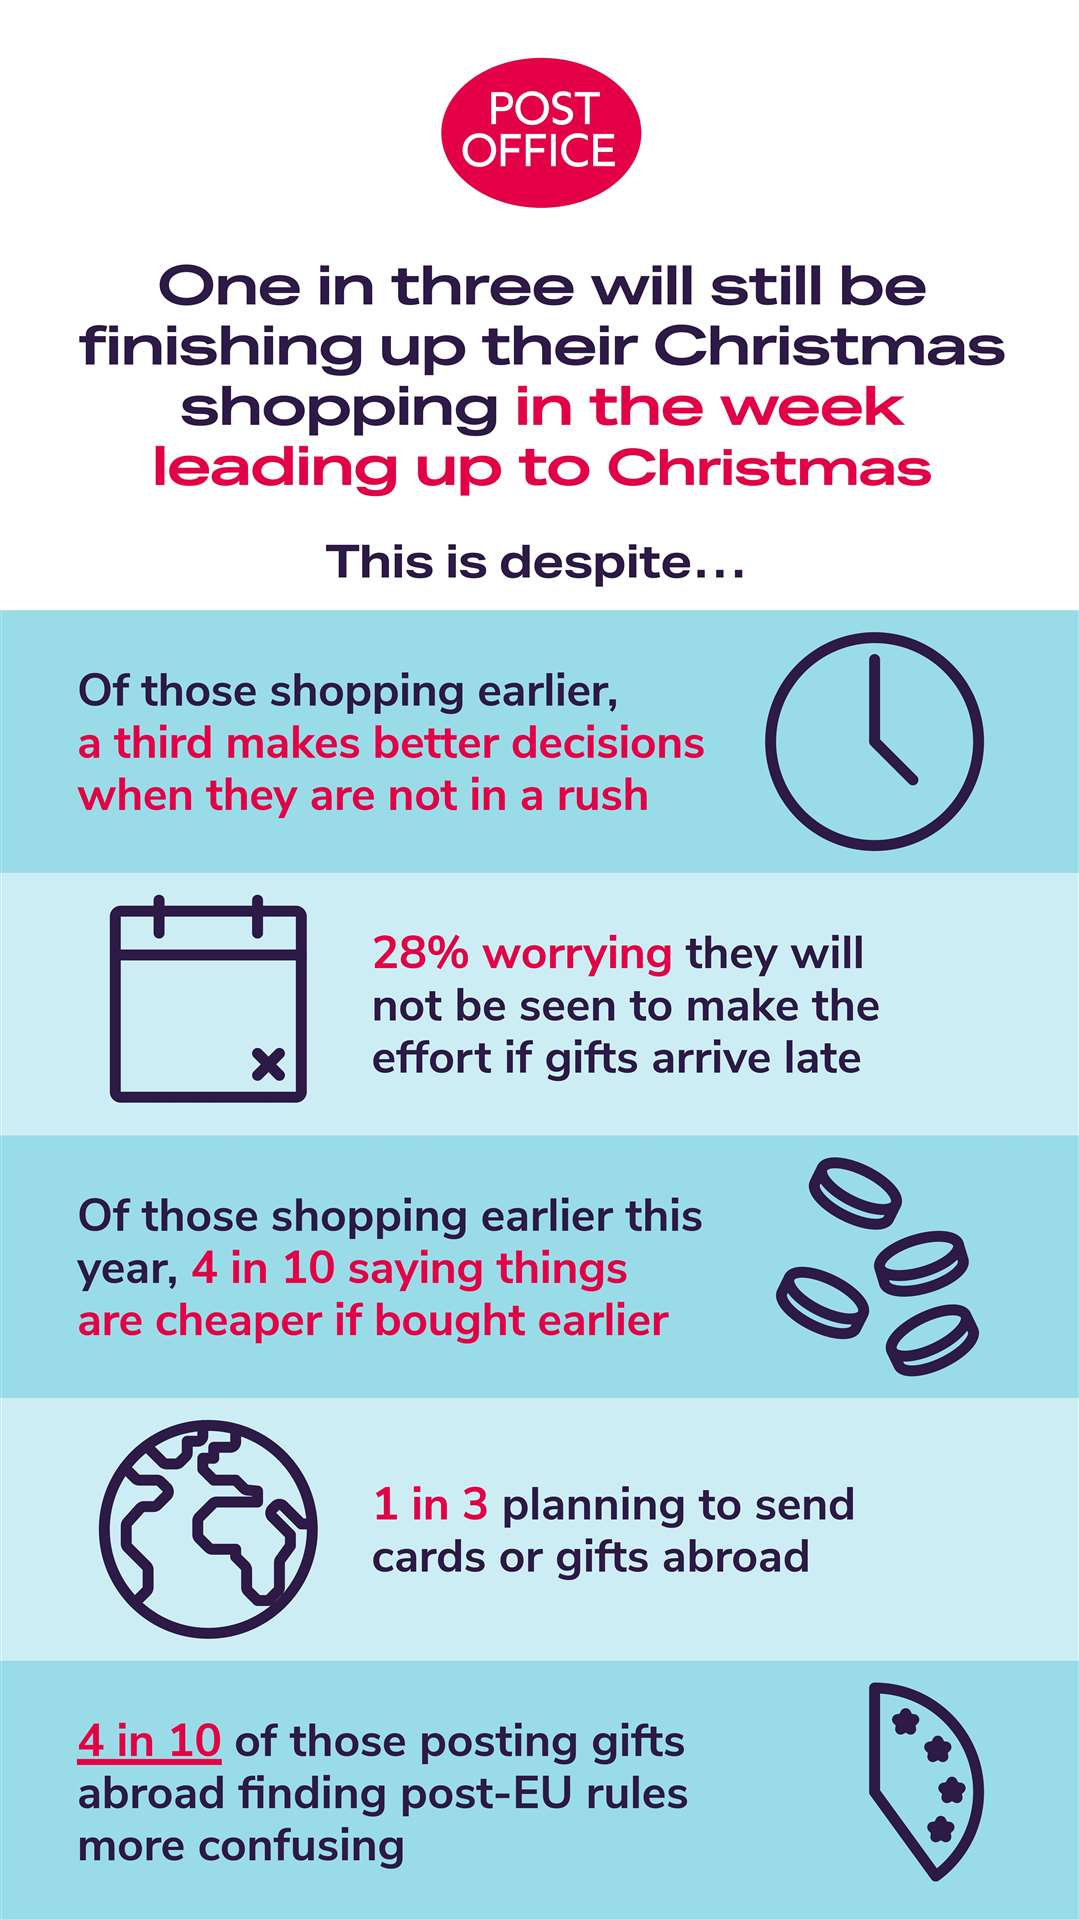 One in three say they will be finishing their shopping in the week leading up to Christmas.